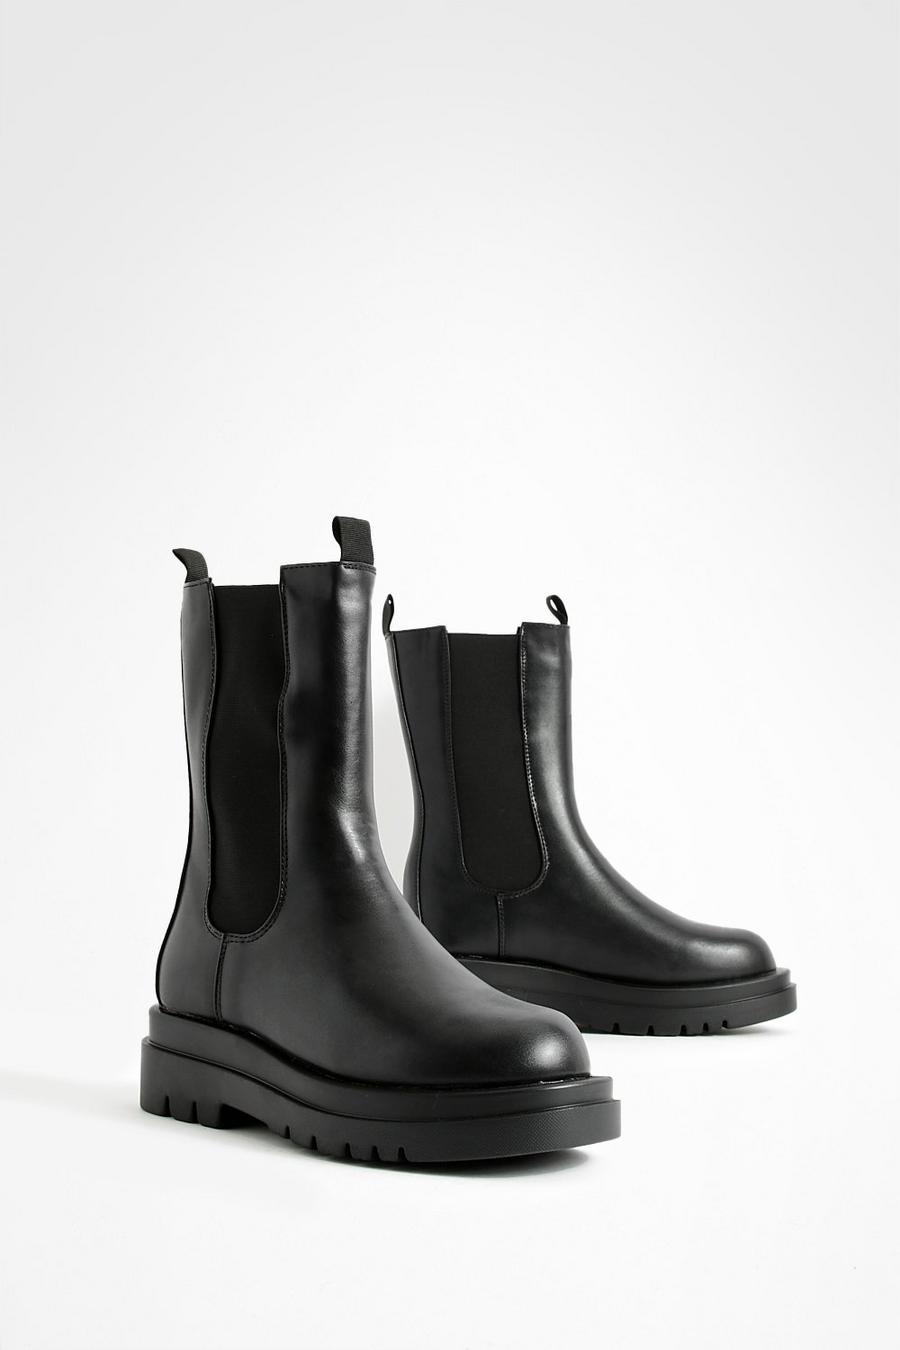 Black Chunky Cleated Calf High Chelsea Boots image number 1